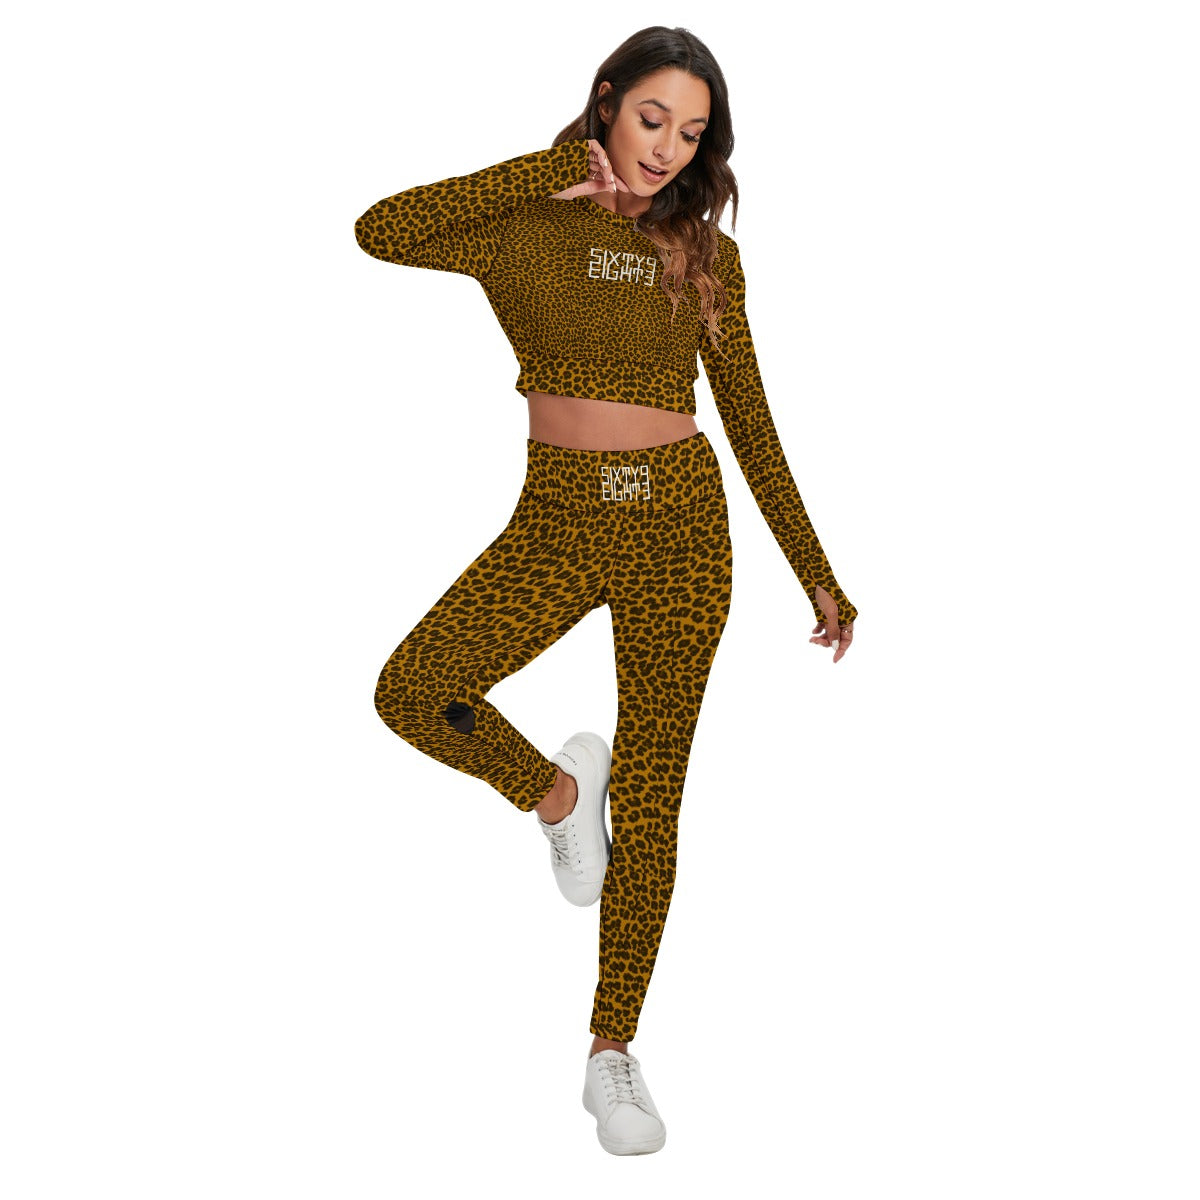 Sixty Eight 93 Logo White Cheetah Orange Women's Sport Set With Backless Top And Leggings